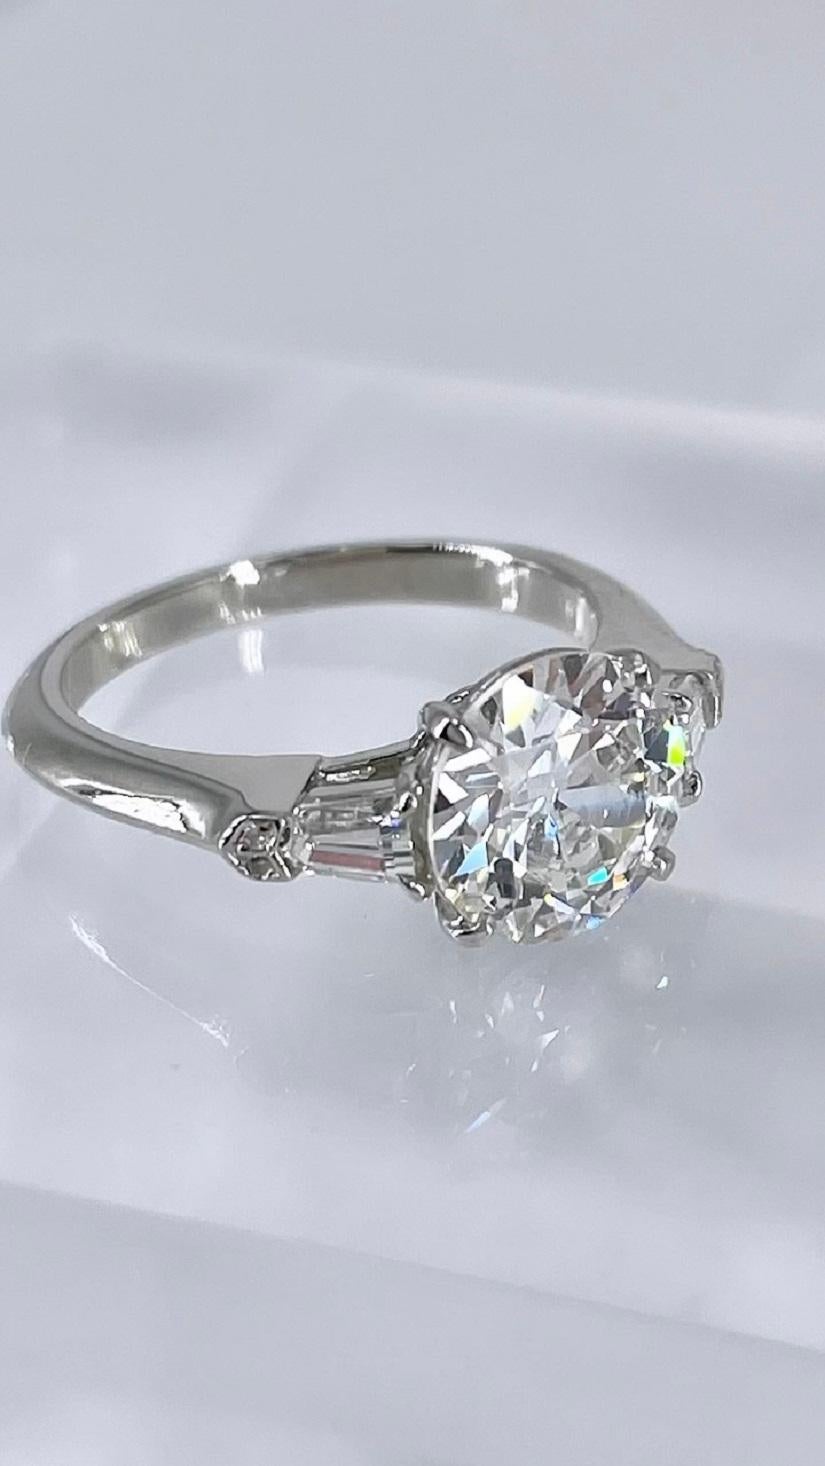 This stunning engagement ring by J. Birnbach features a 1.97 carat European cut diamond, certified by GIA as G color and SI1 clarity. This charming diamond has the delightful sparkle, larger facets, and visible culet that are characteristic of